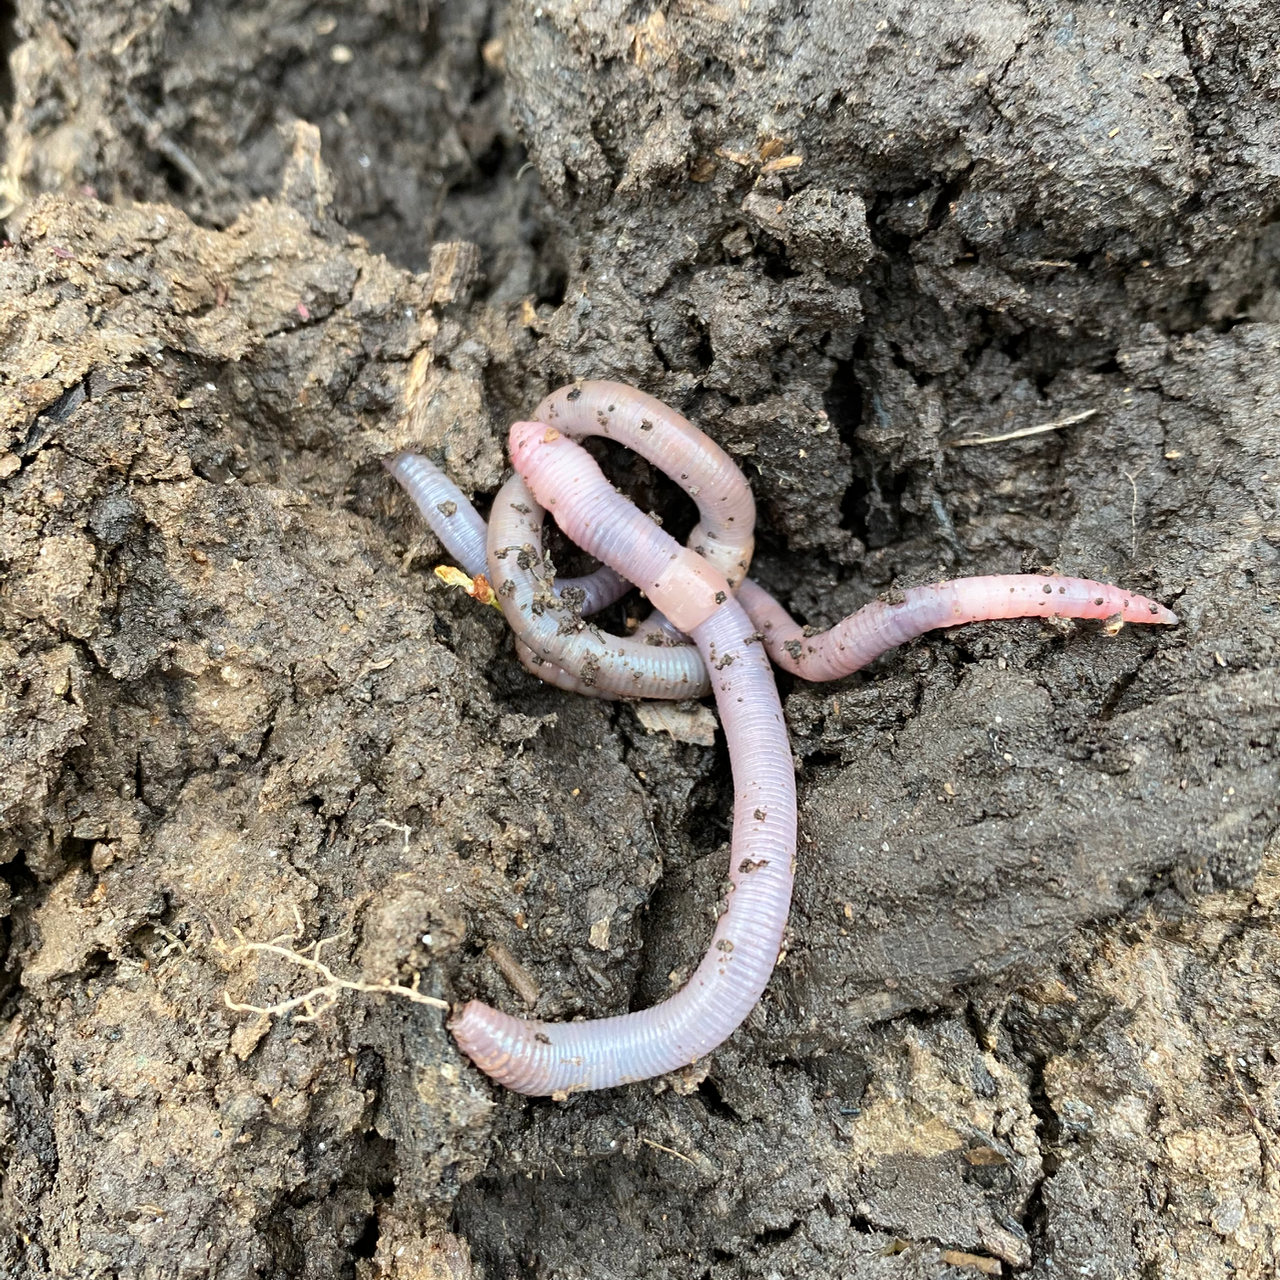 Two Earthworms